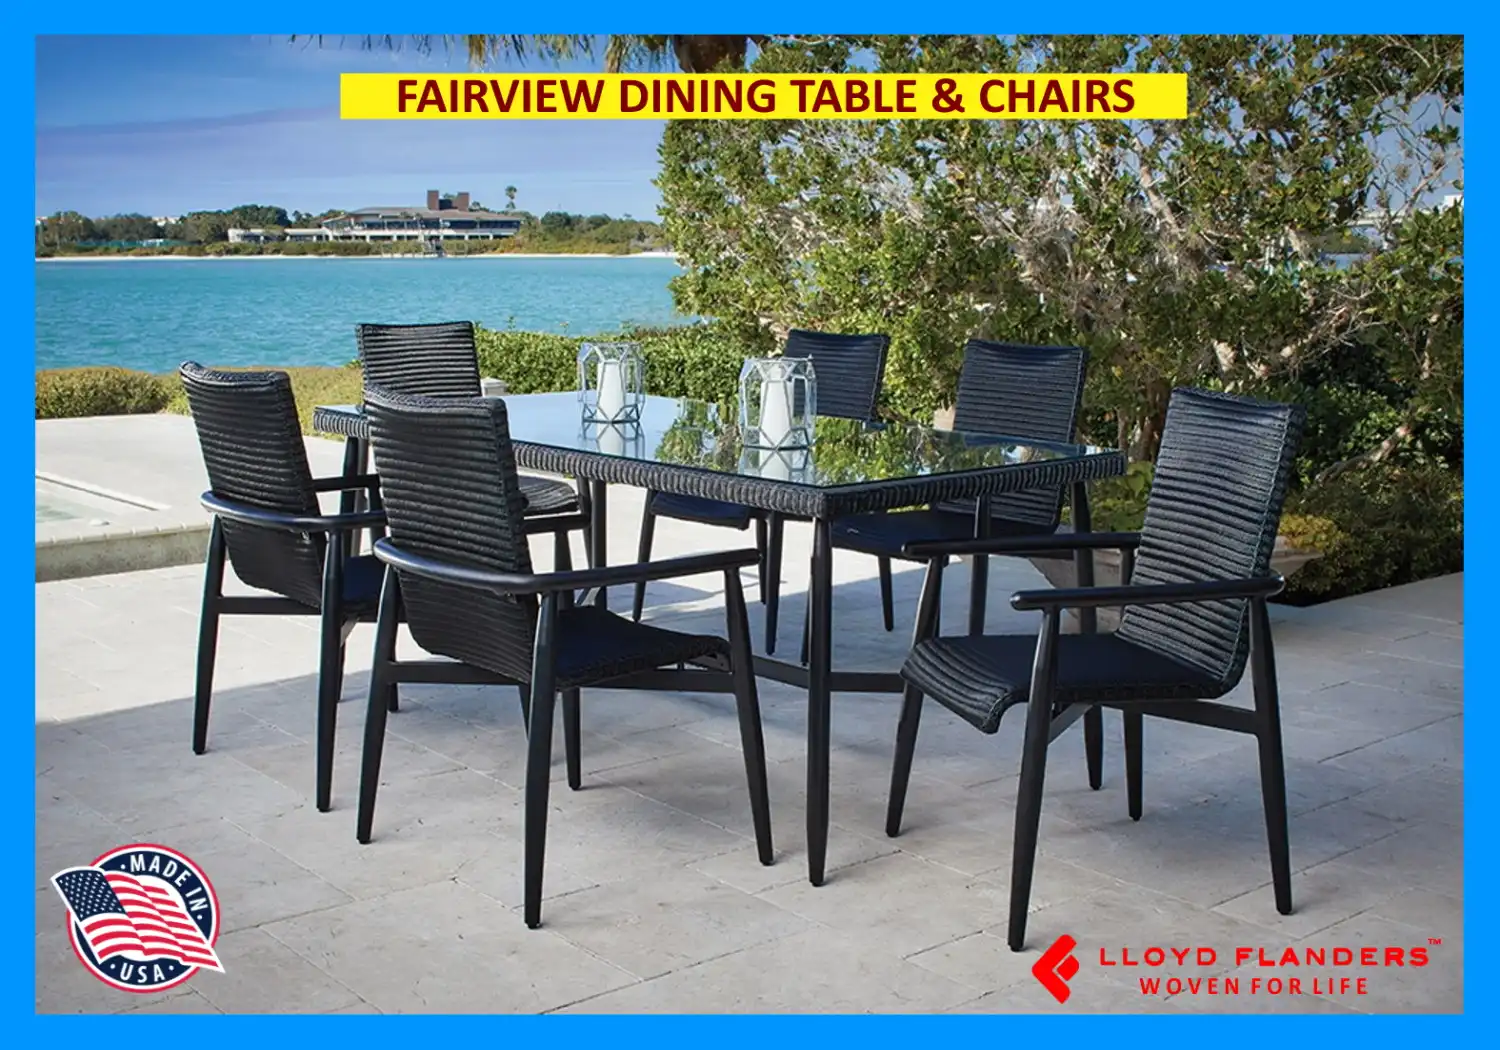 FAIRVIEW DINING TABLE & CHAIRS